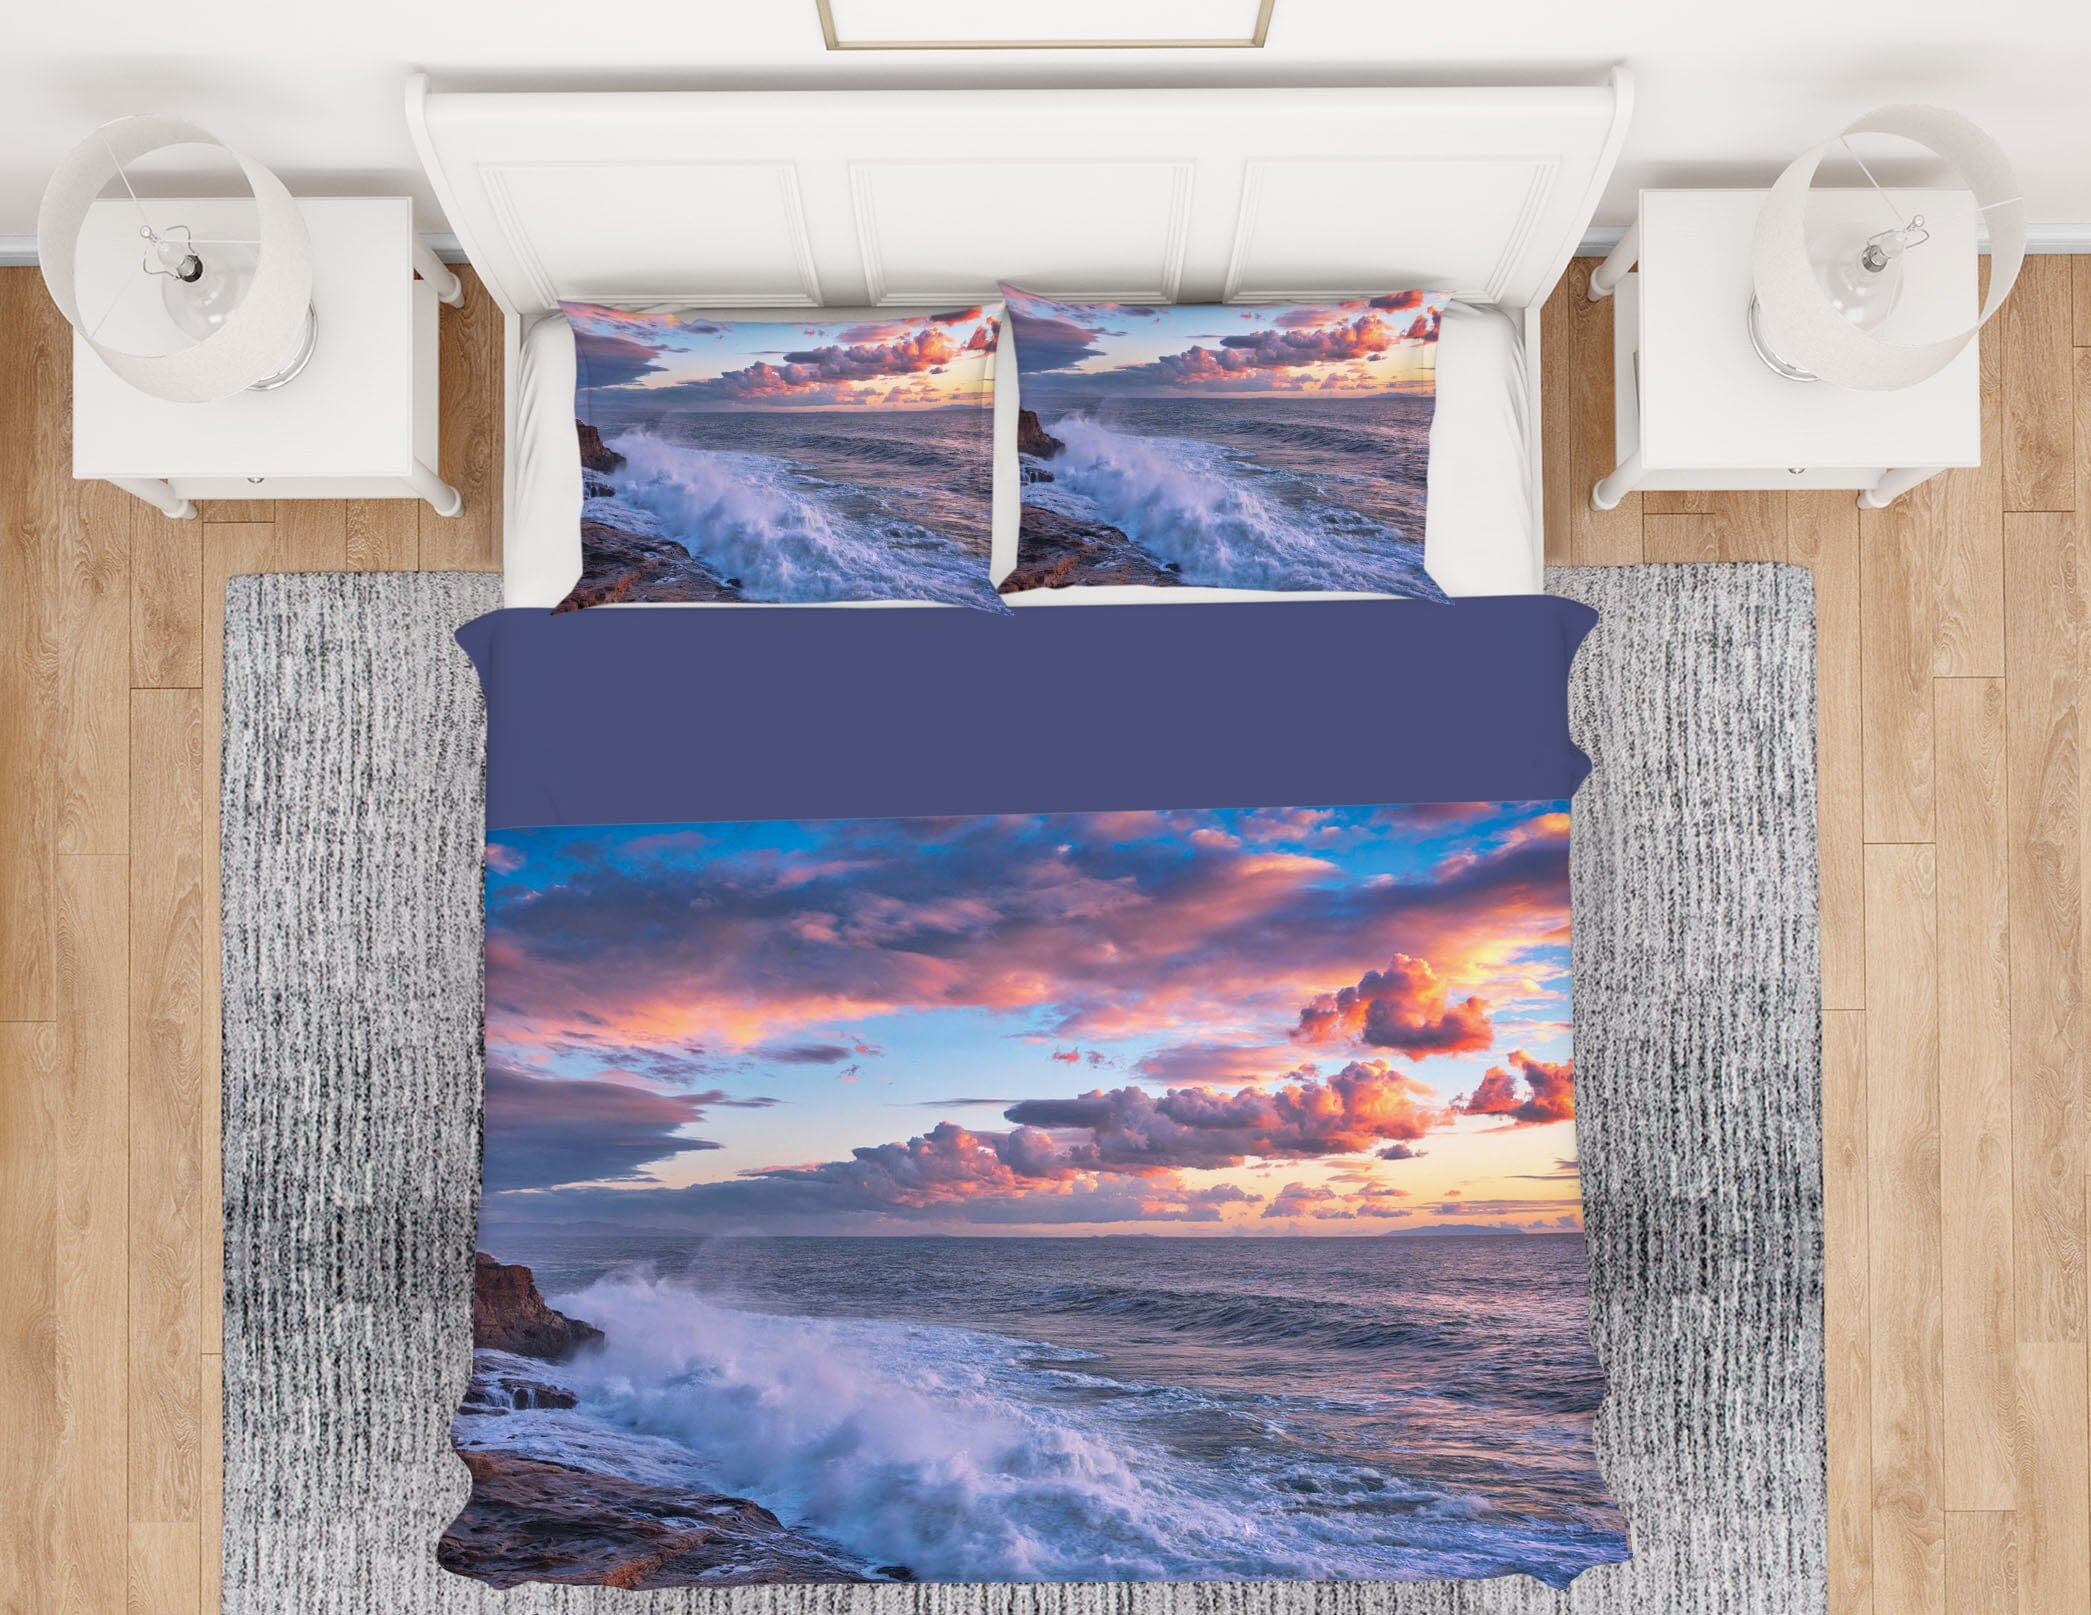 3D Sea Wave 2106 Marco Carmassi Bedding Bed Pillowcases Quilt Quiet Covers AJ Creativity Home 